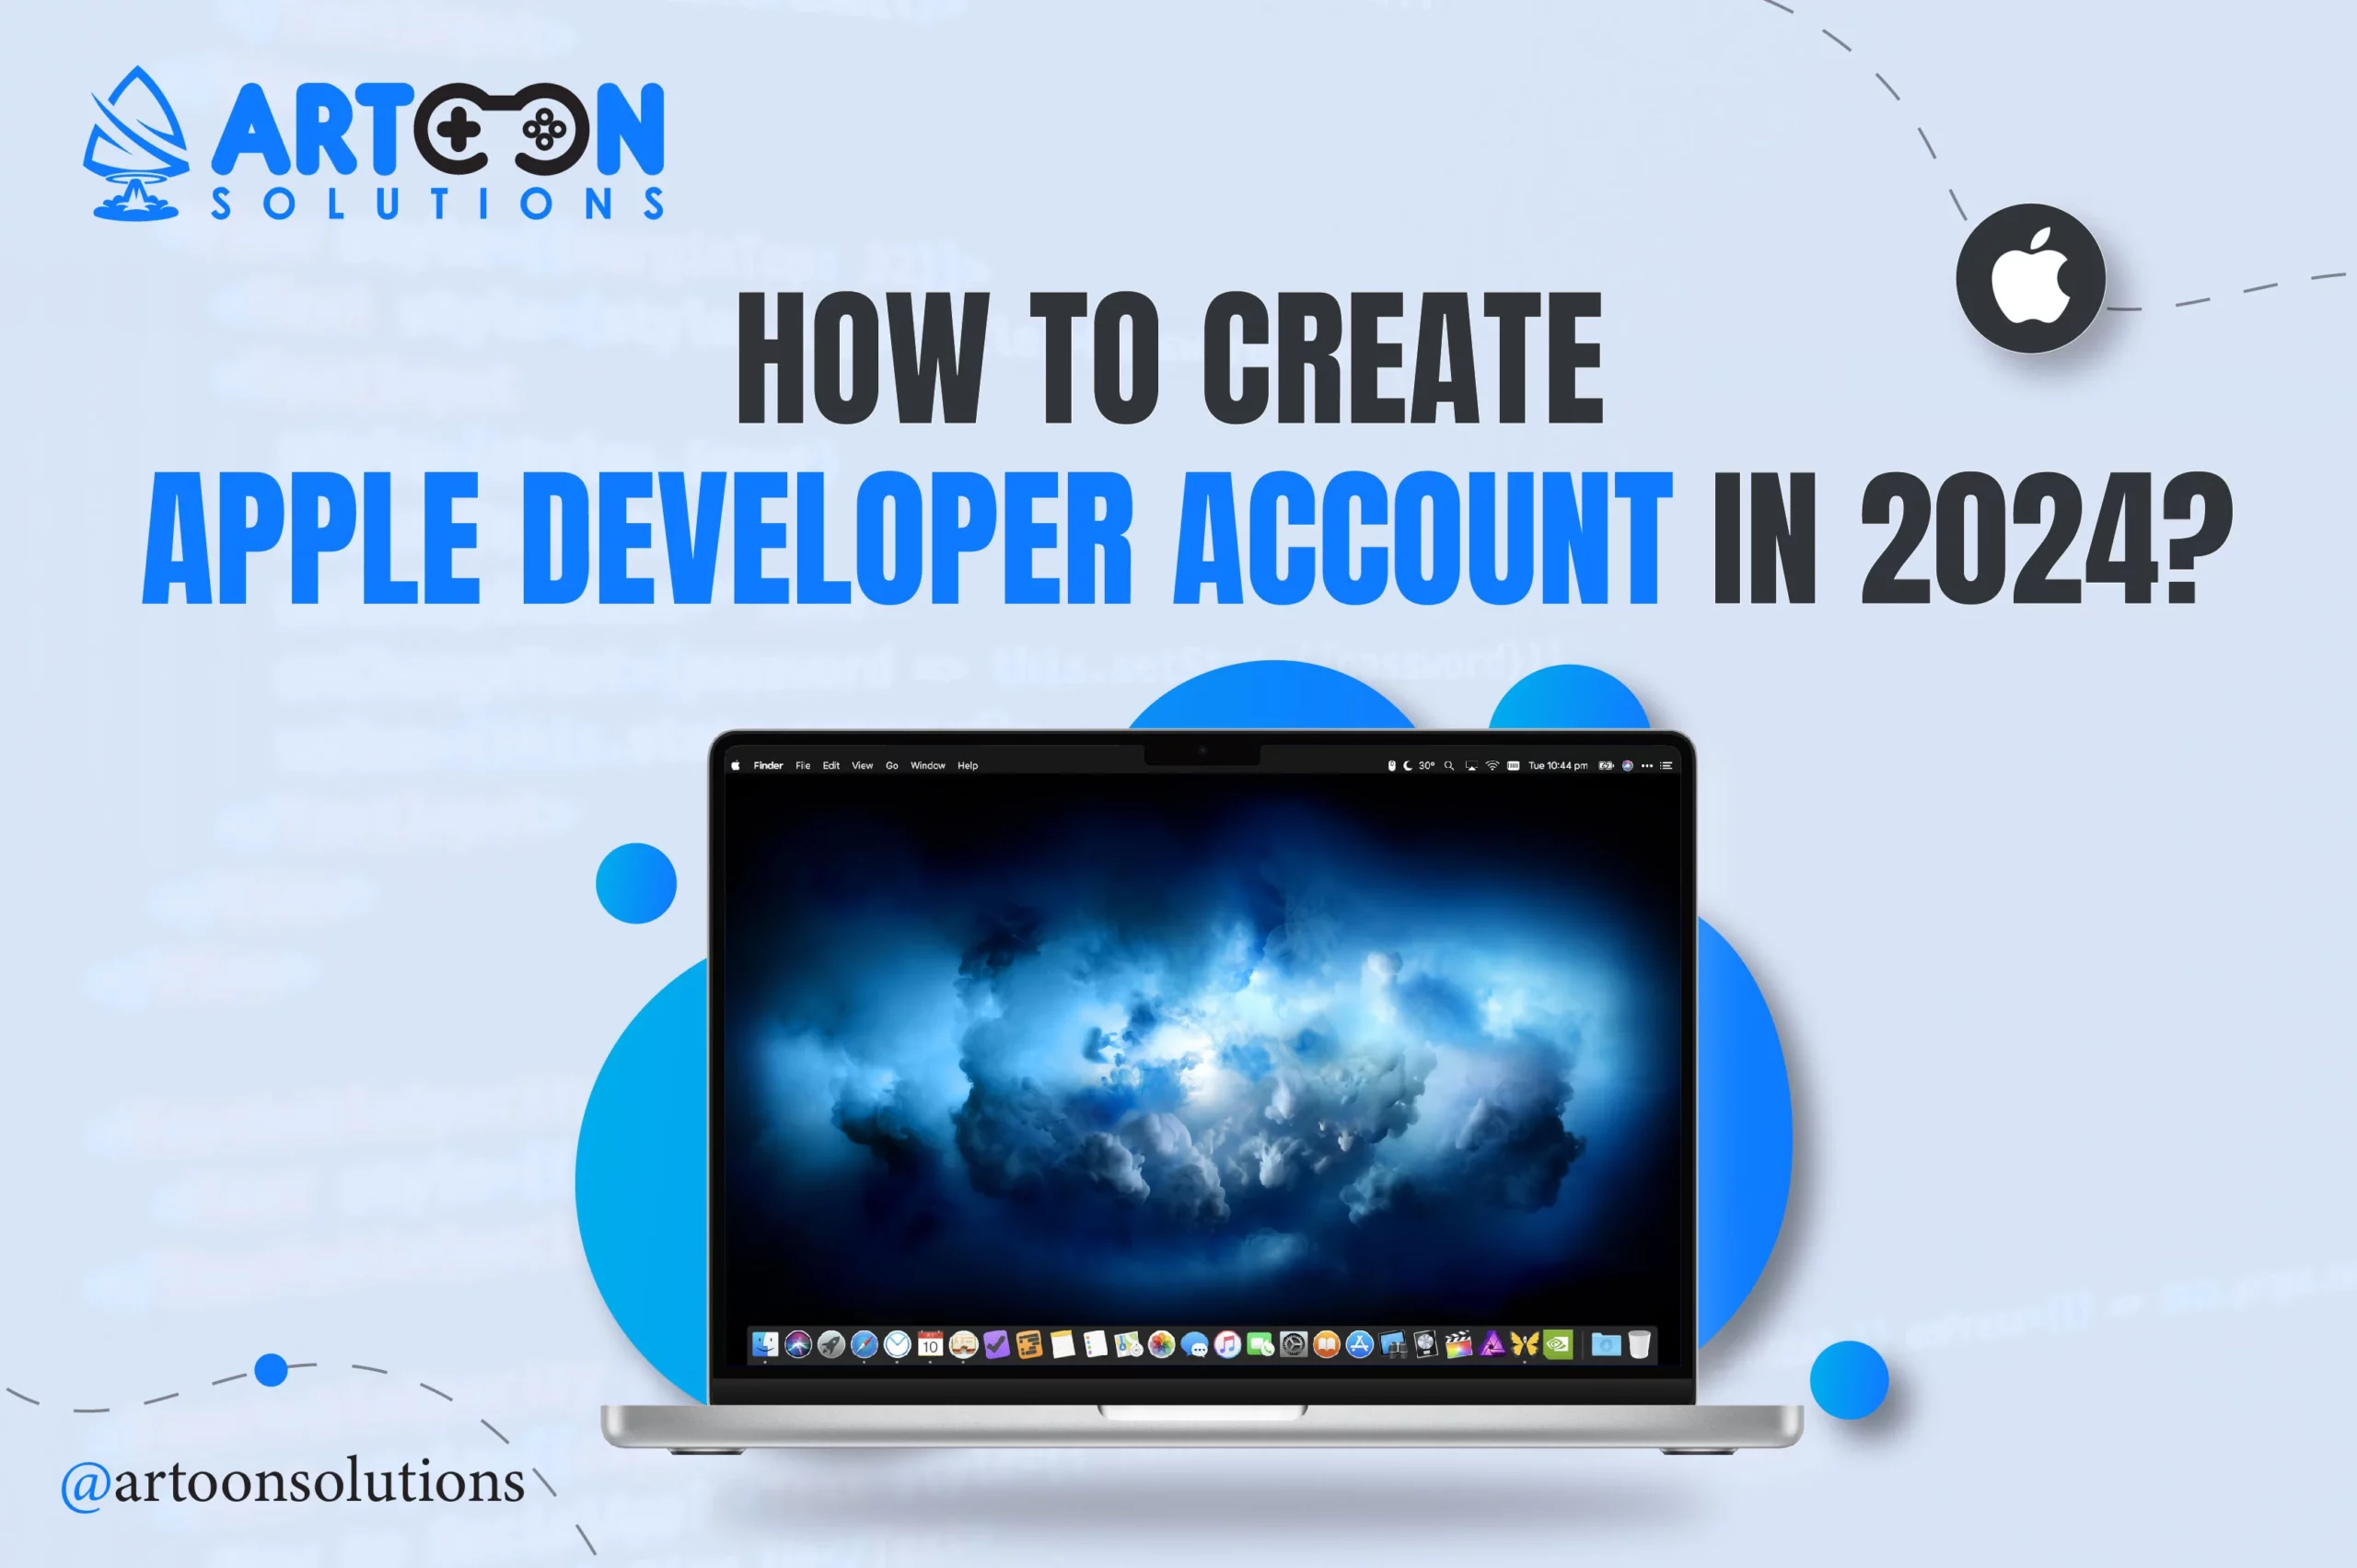 How to Create an Apple Developer Account in 2024?